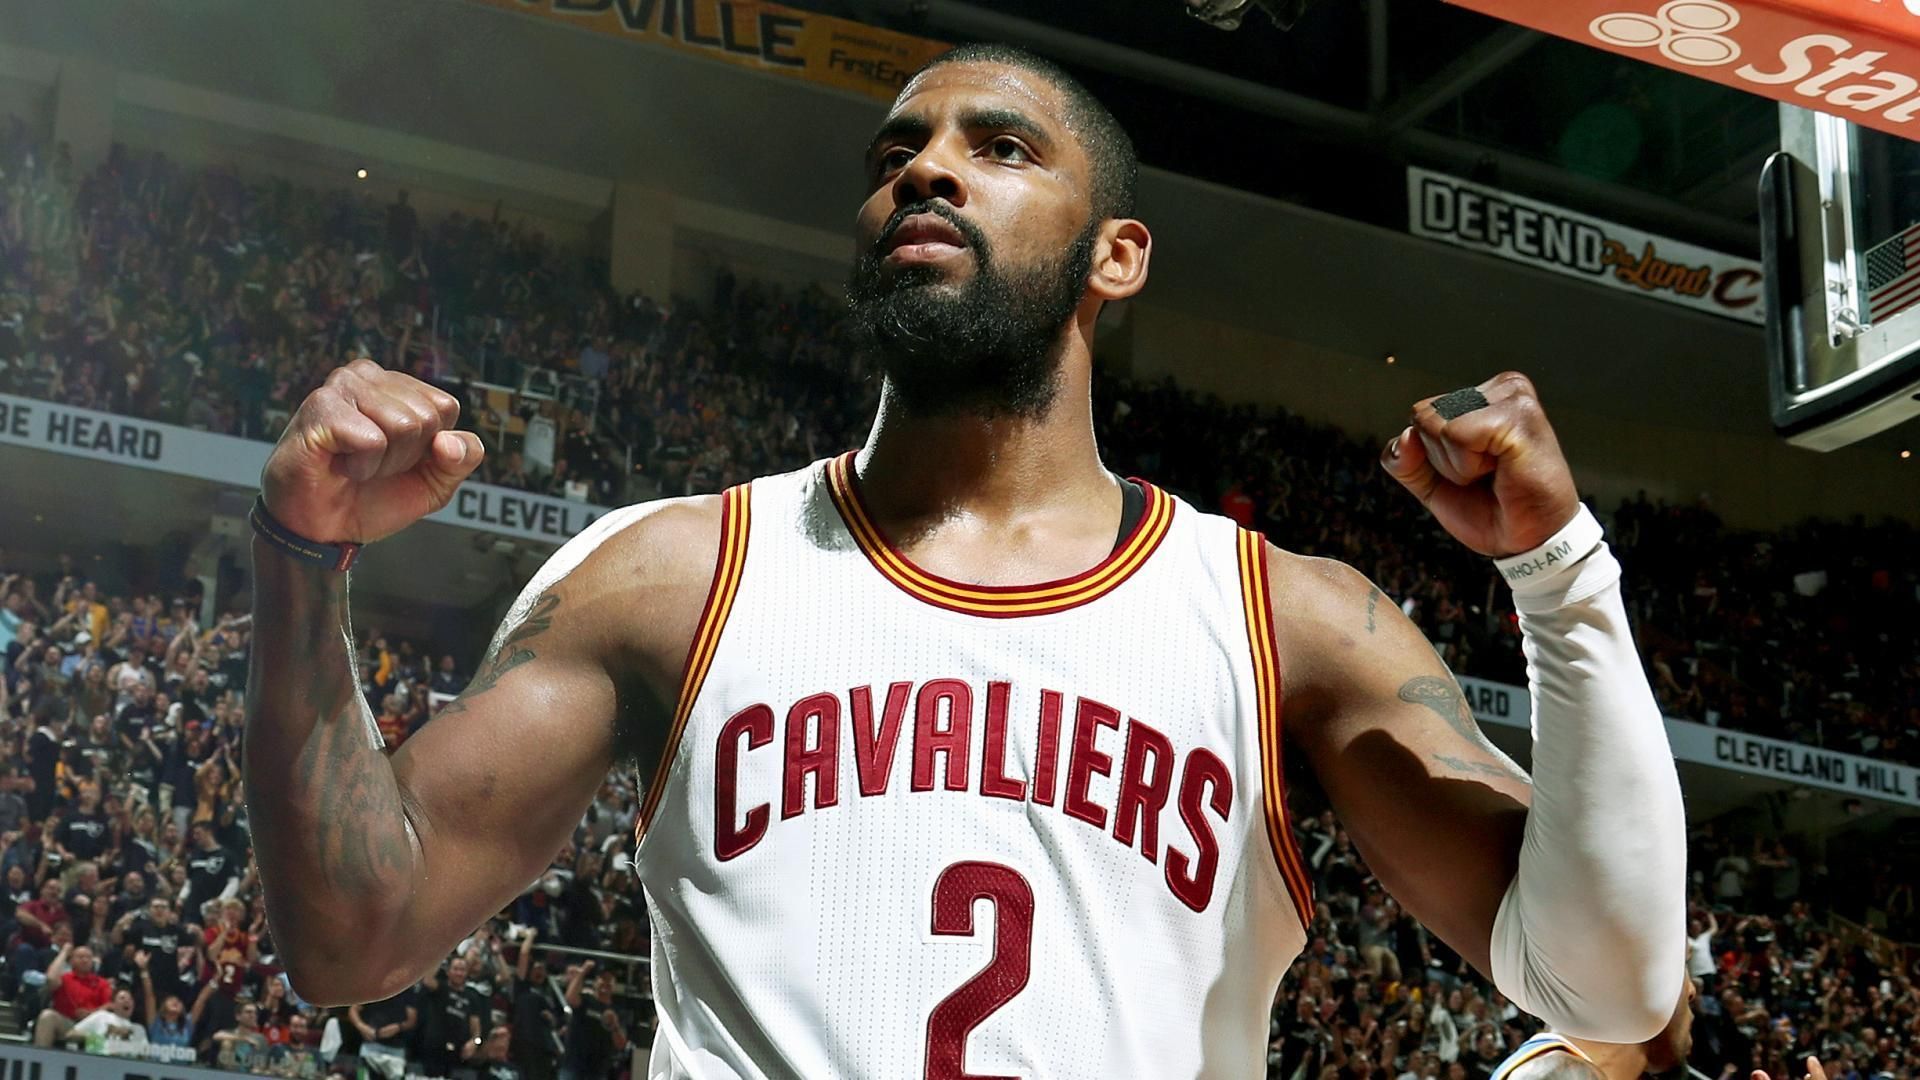 1080p Kyrie Irving Full Hd Wallpapers And Pictures 1080p Fullhdwallpaper Net